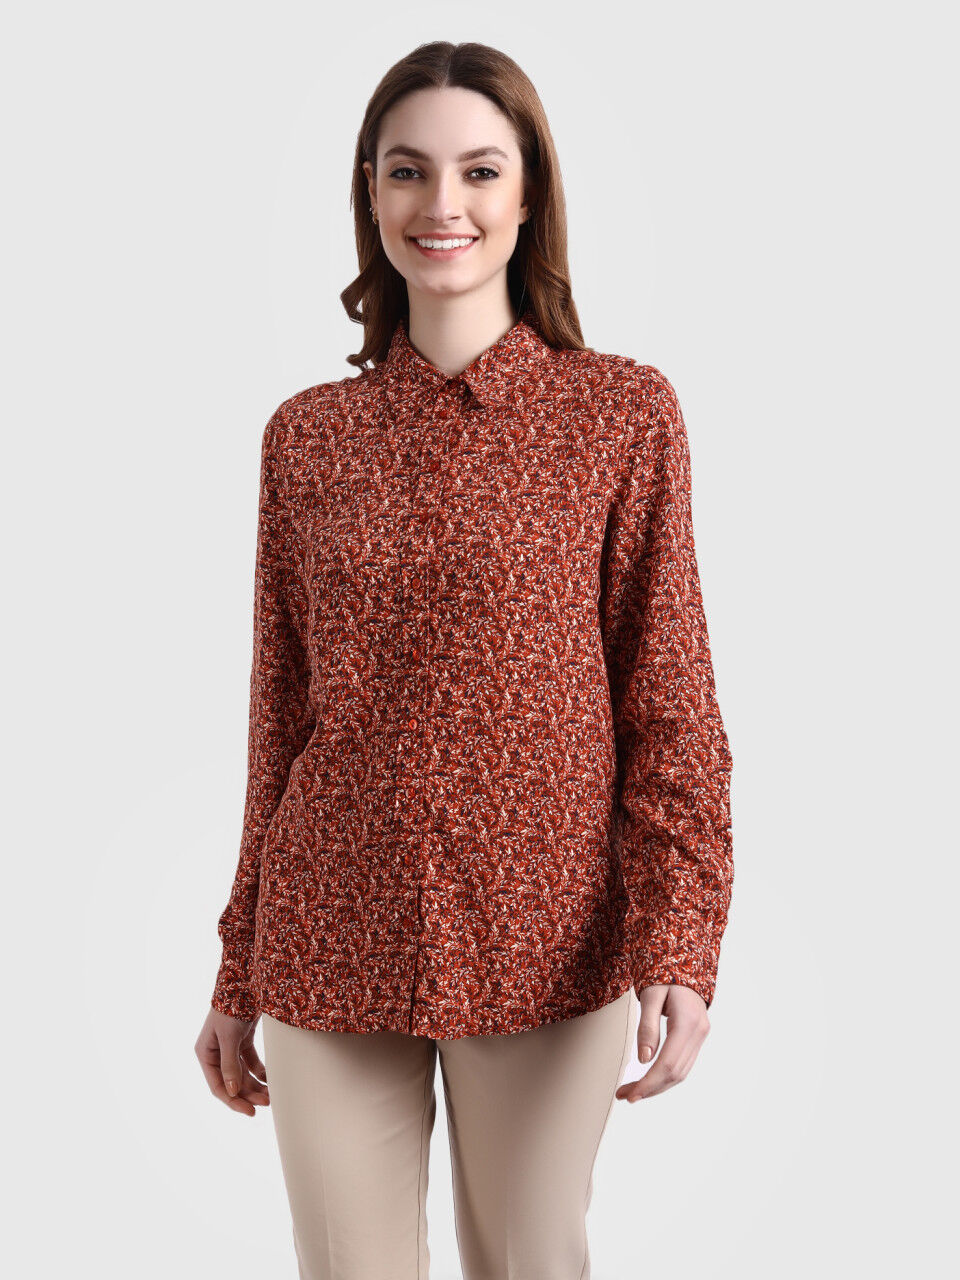 Floral Print Shirt with Full Sleeves